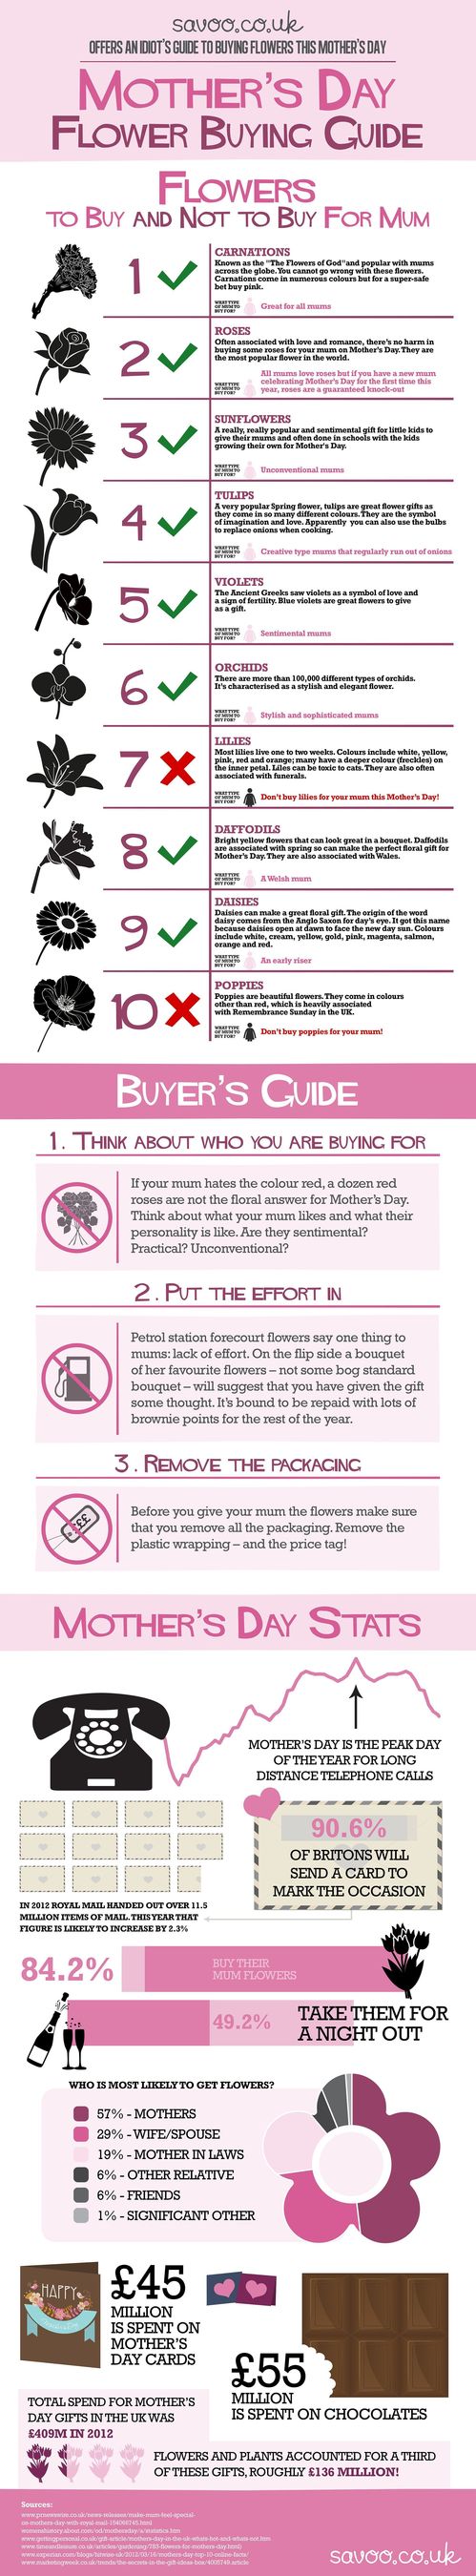 Buying flowers can be a tricky â€“ a world that only a few people understand! So, have you ever wondered what flowers to buy and when to buy them? This â€˜buying guideâ€™, produced by the money-saving website Savoo.co.ouk, helps answer those questions for those who might be confused, not want to make a faux-pas and who want to get the best flowers for their money â€“ especially with Motherâ€™s Day just round the corner (PRNewsFoto/Savoo.co.uk)